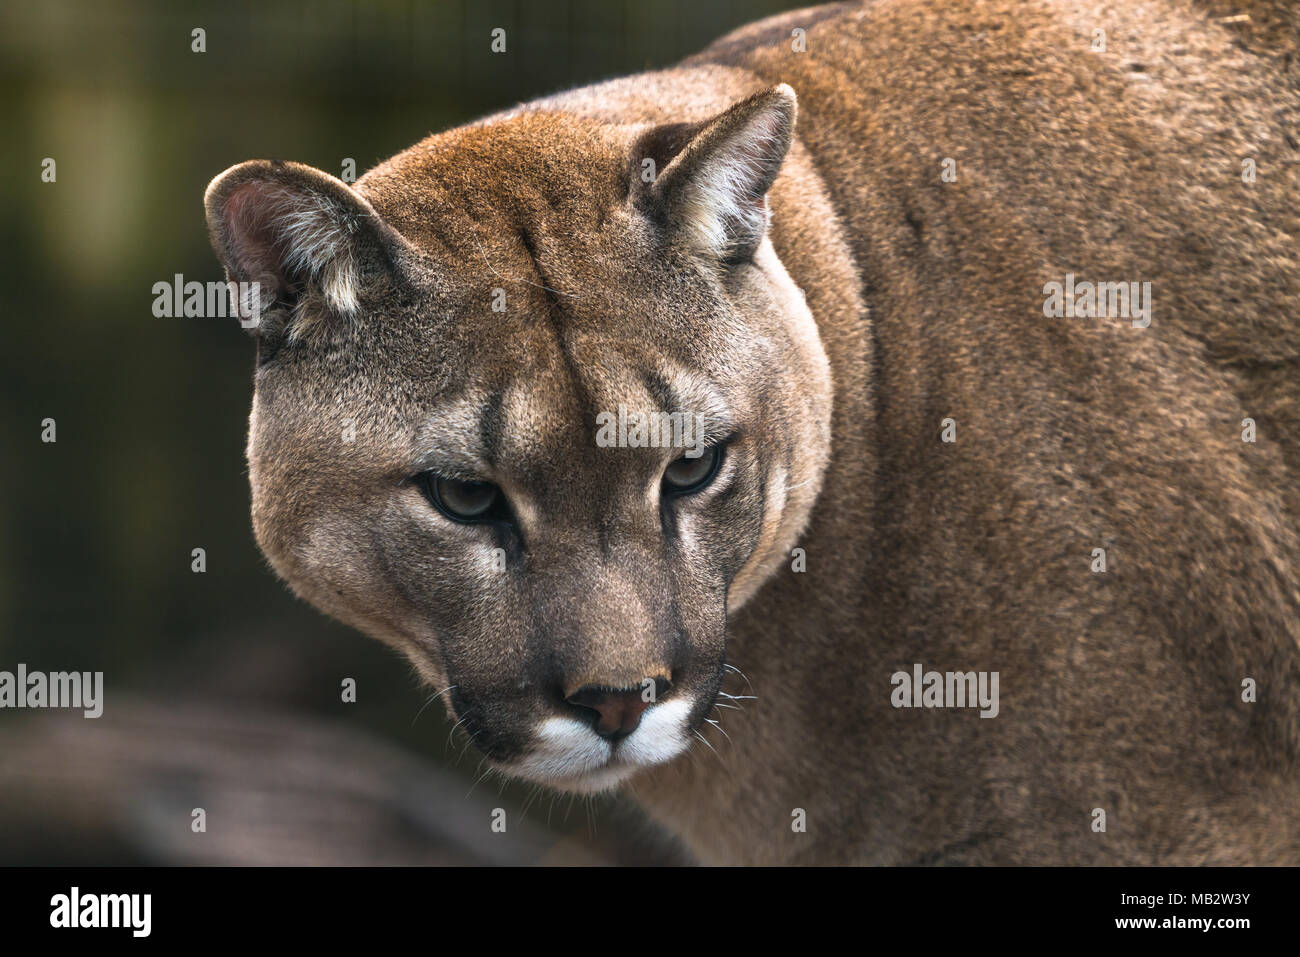 Puma (Puma concolor), a large Cat mainly found in the mountains from southern Canada to the tip of South America. Also known as cougar, mountain lion, Stock Photo